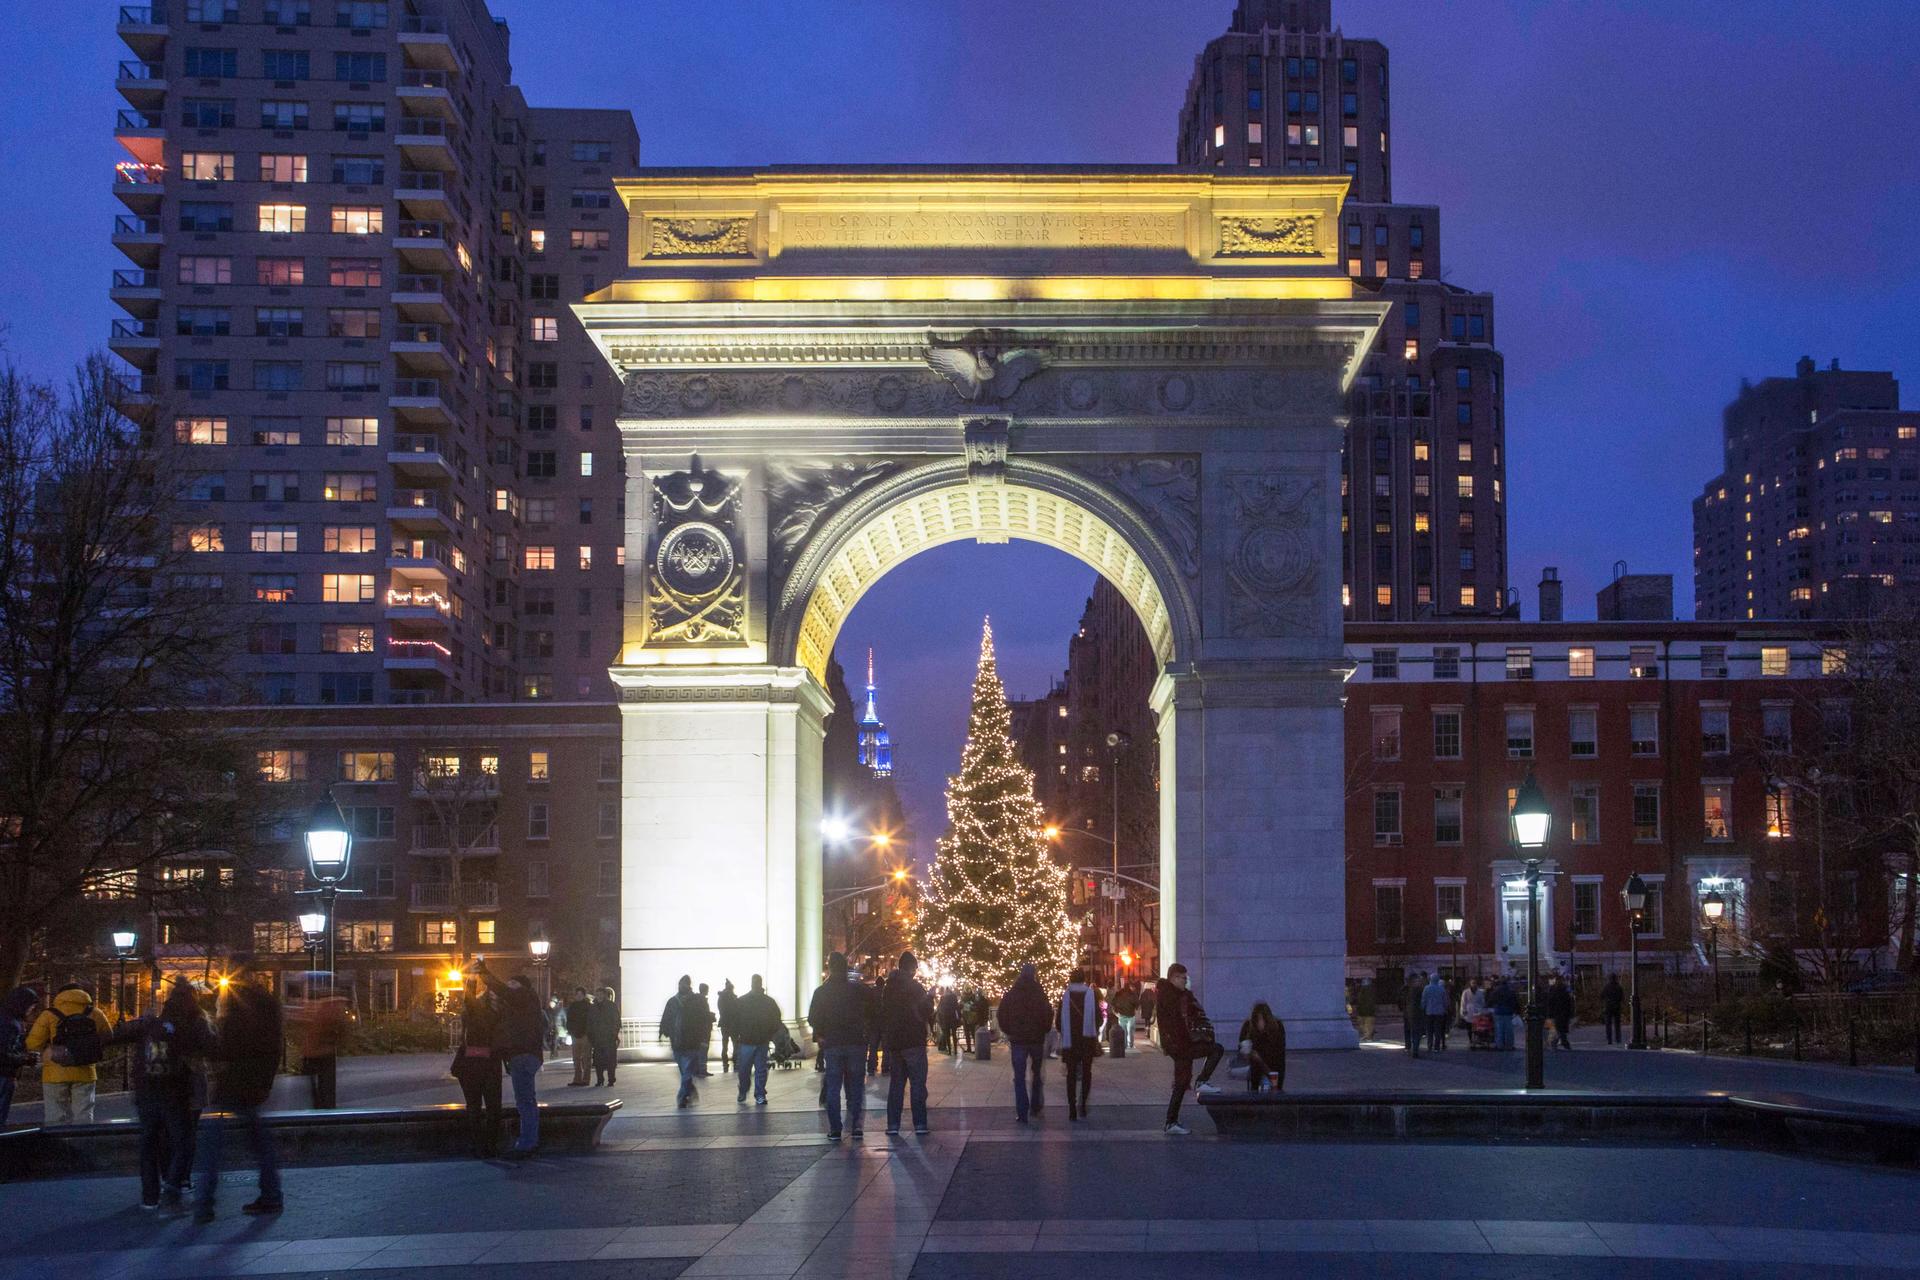 Silhouettes of people standing in front of a fully lit Christmas tree underneath the arch in Washington Square Park 